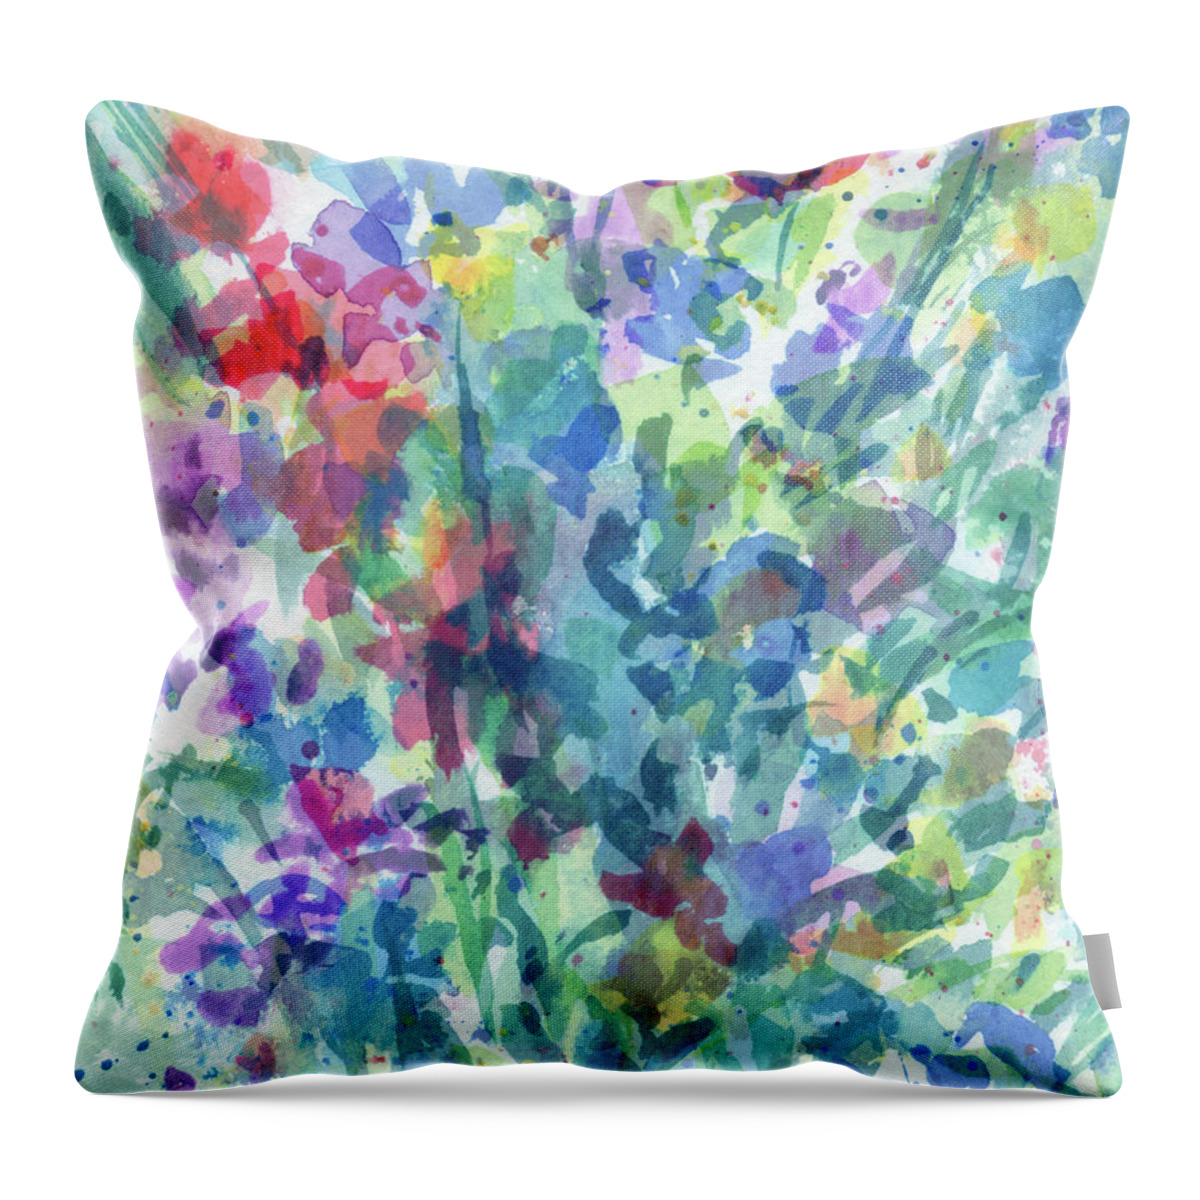 Abstract Flowers Throw Pillow featuring the painting Splish Splash Abstract Cool Flowers The Burst Of Multicolor Watercolor Contemporary I by Irina Sztukowski